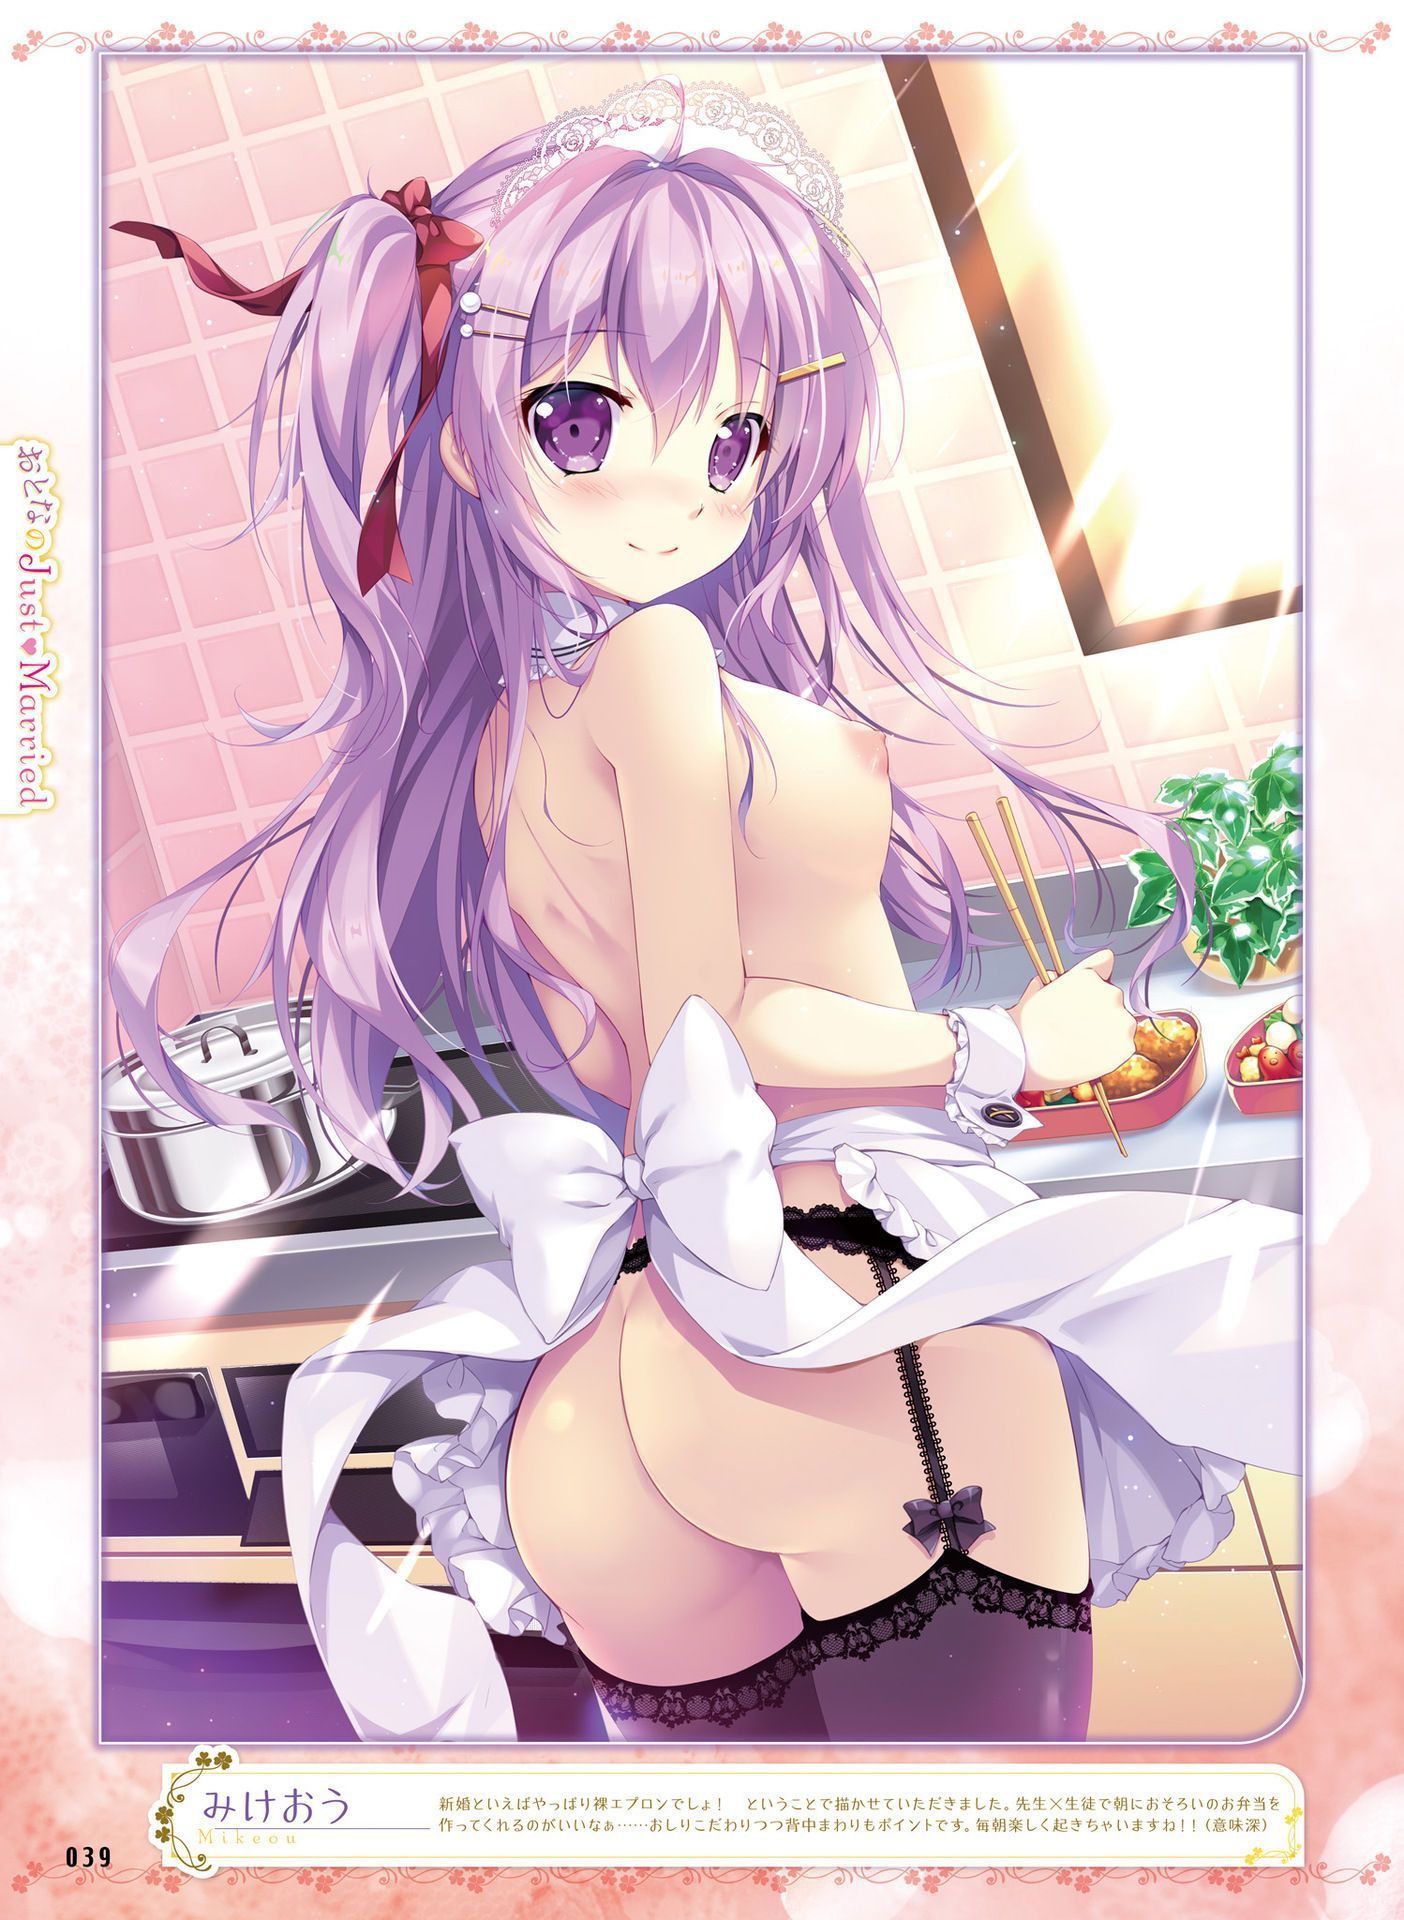 [2nd] Second erotic image of a girl with purple hair part 8 [Purple hair] 15